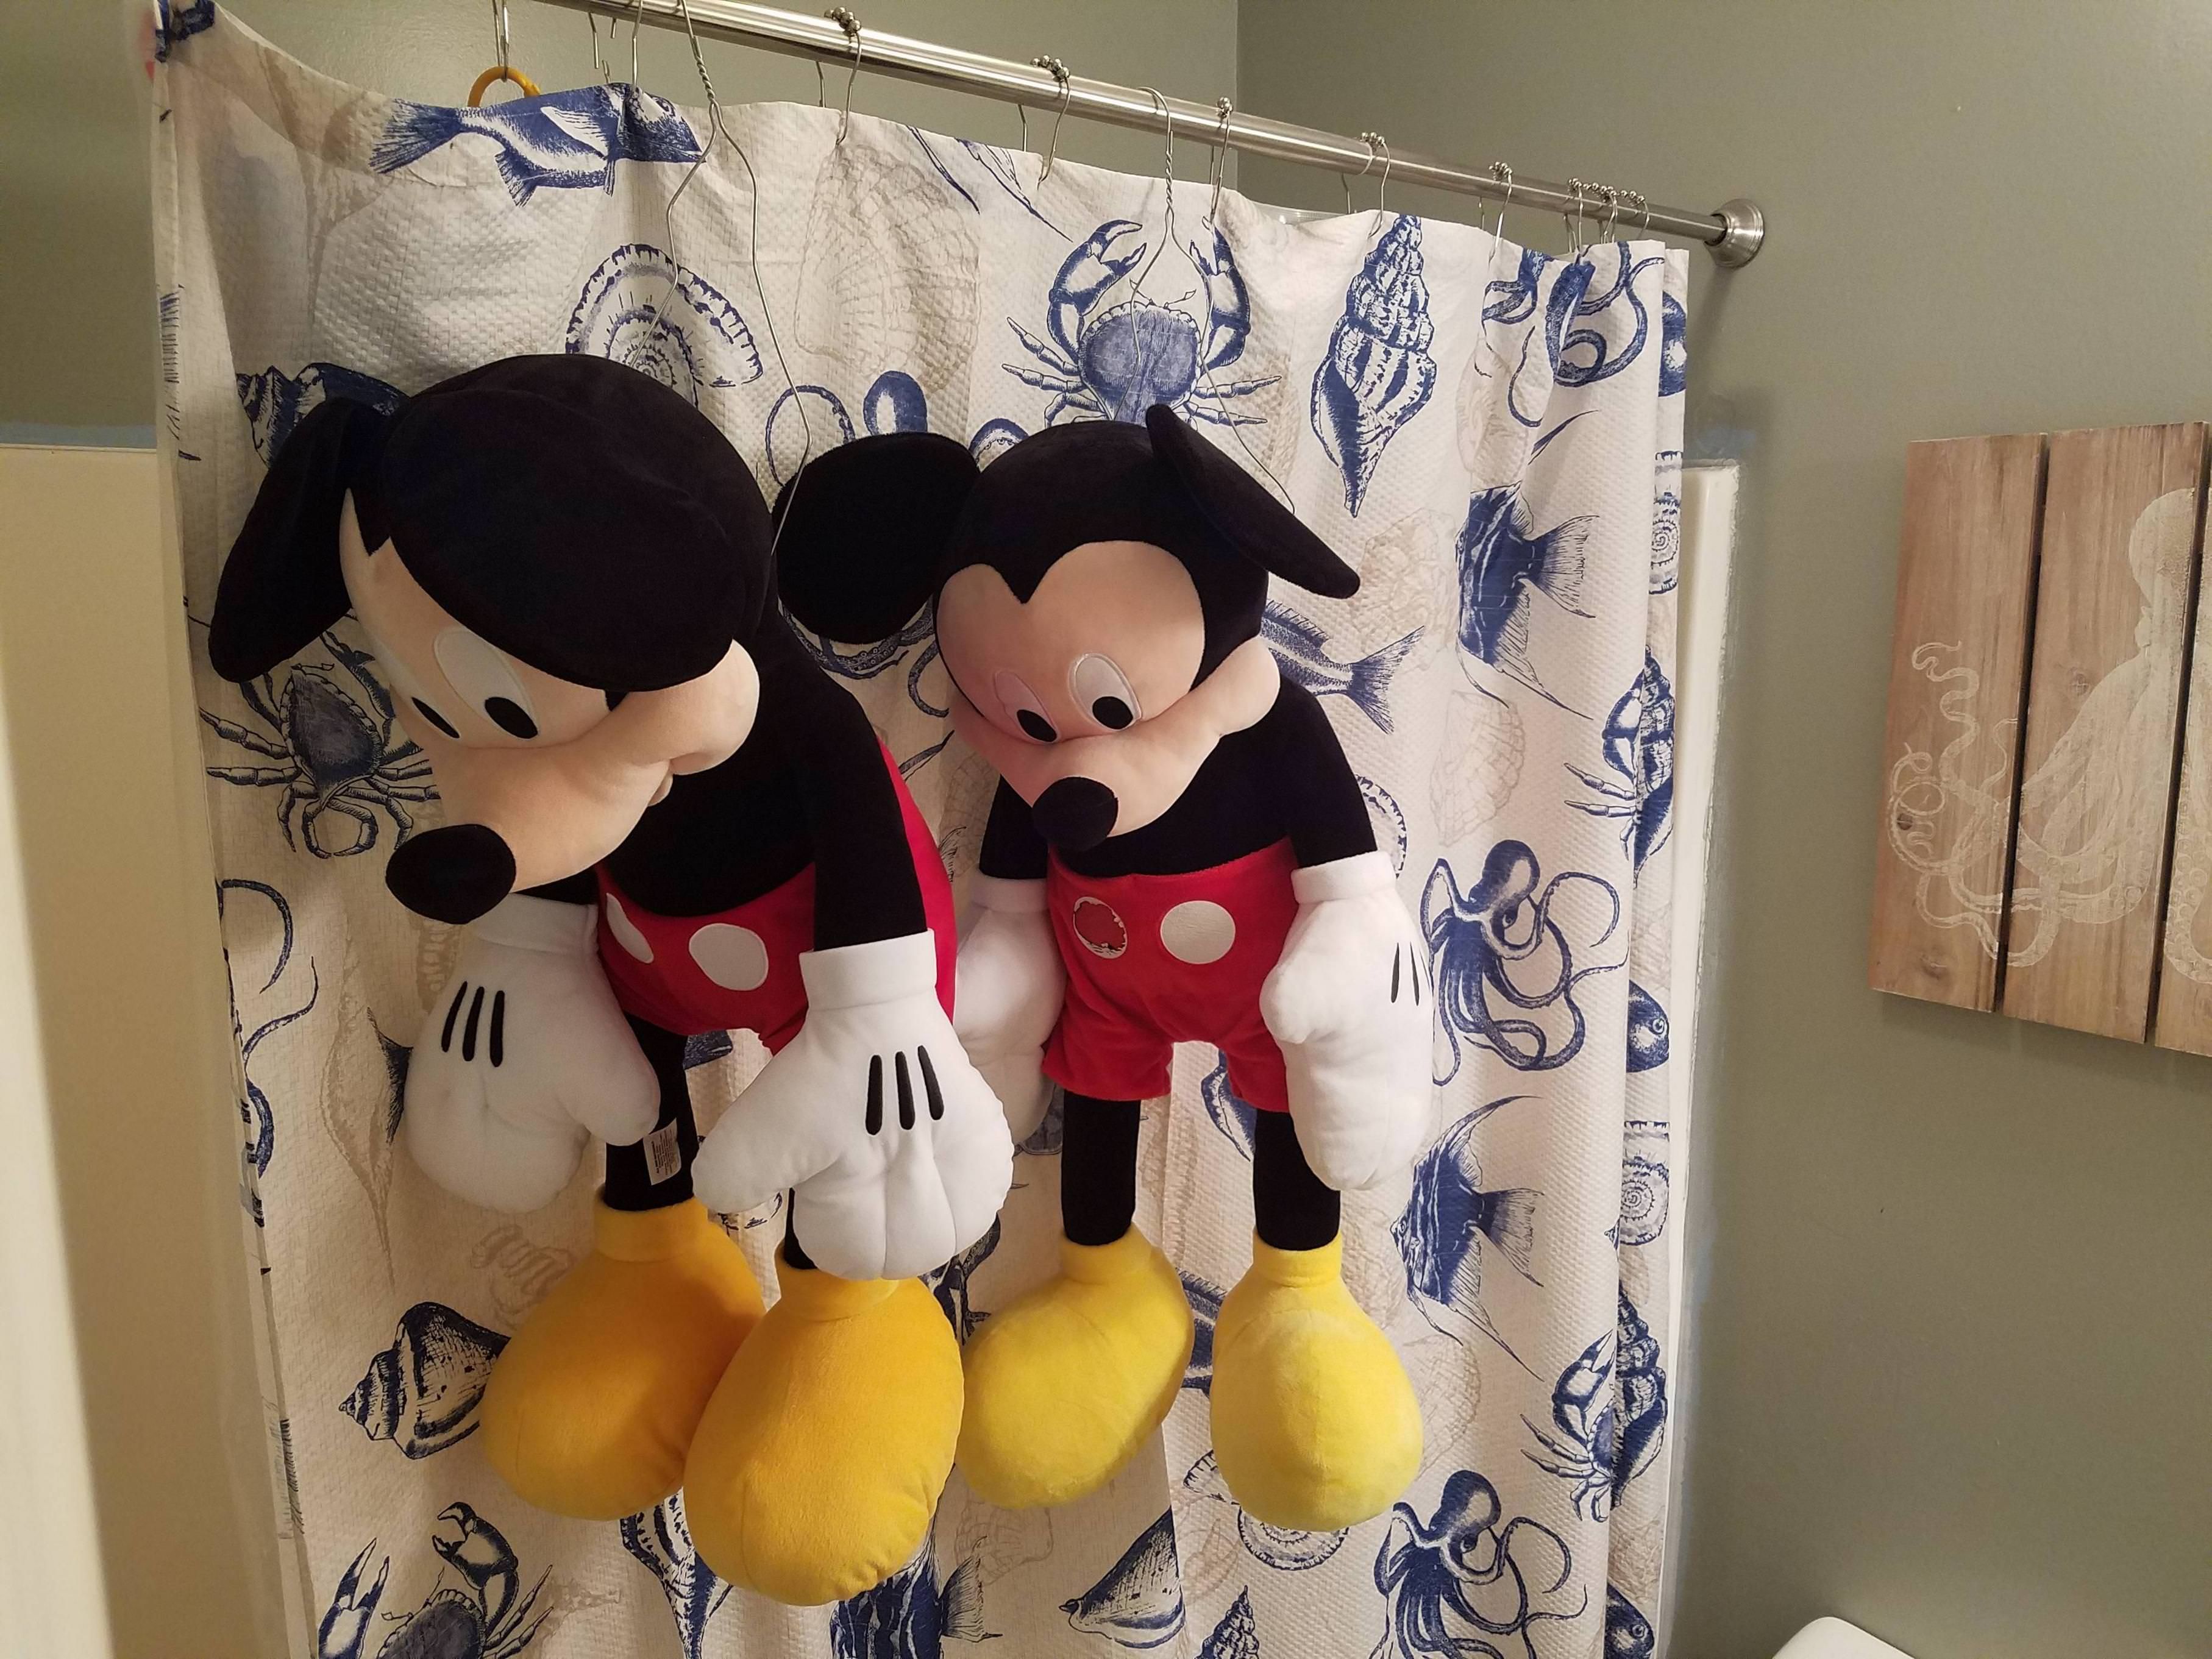 Walked into bathroom where my wife was air drying my son's Mickey dolls. I call it Mickey Mouse Slaughter House.